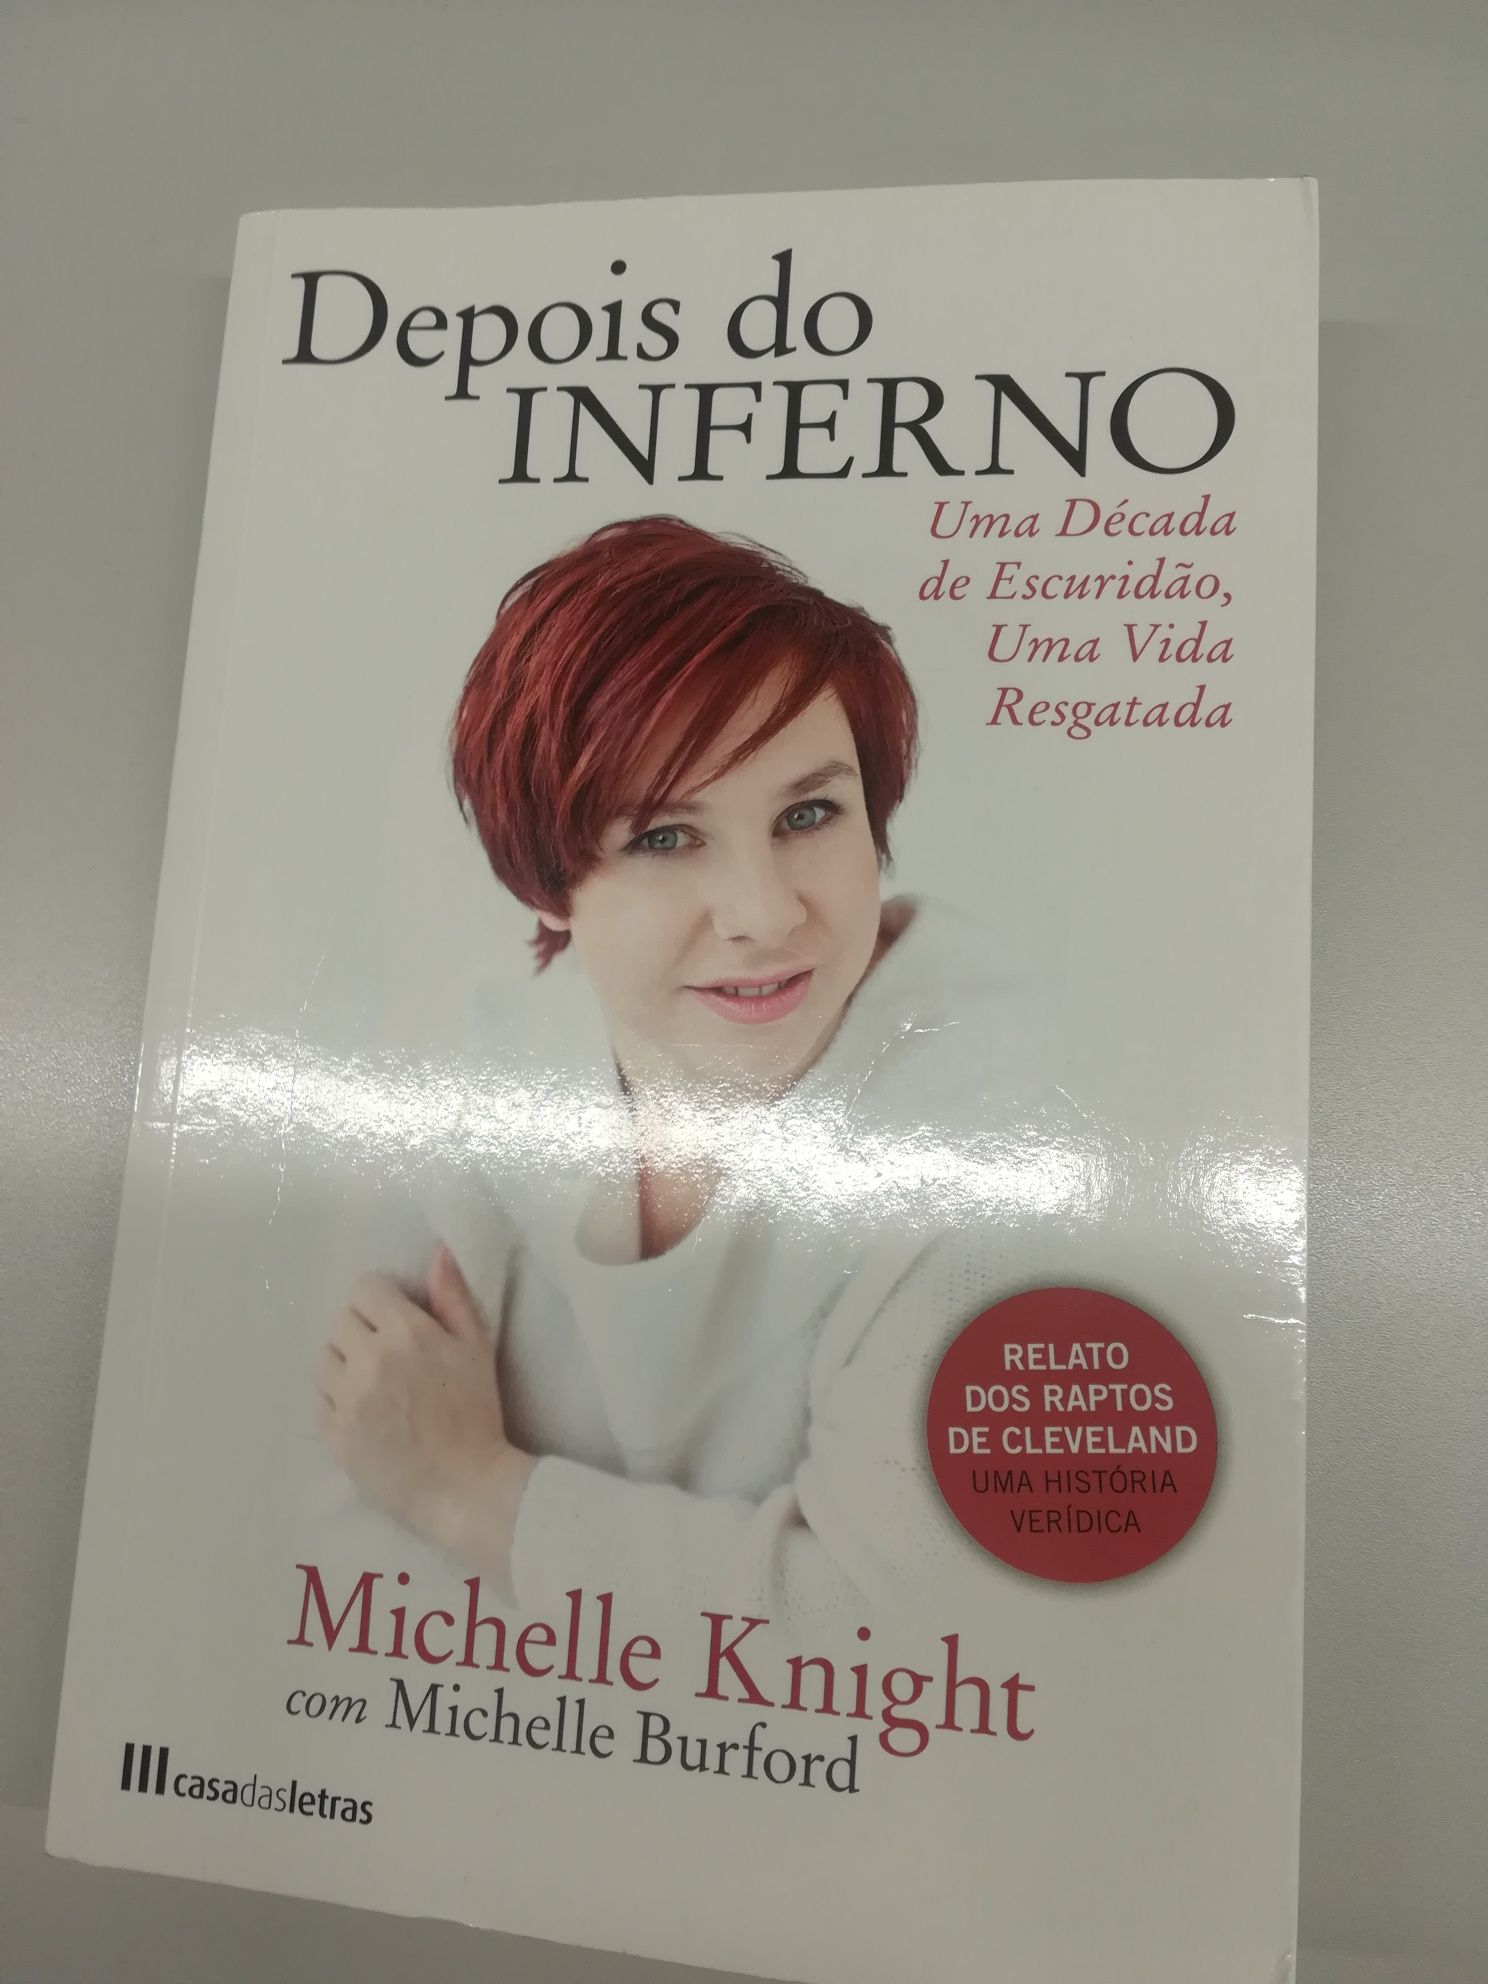 Depois do inferno - Michelle Knight